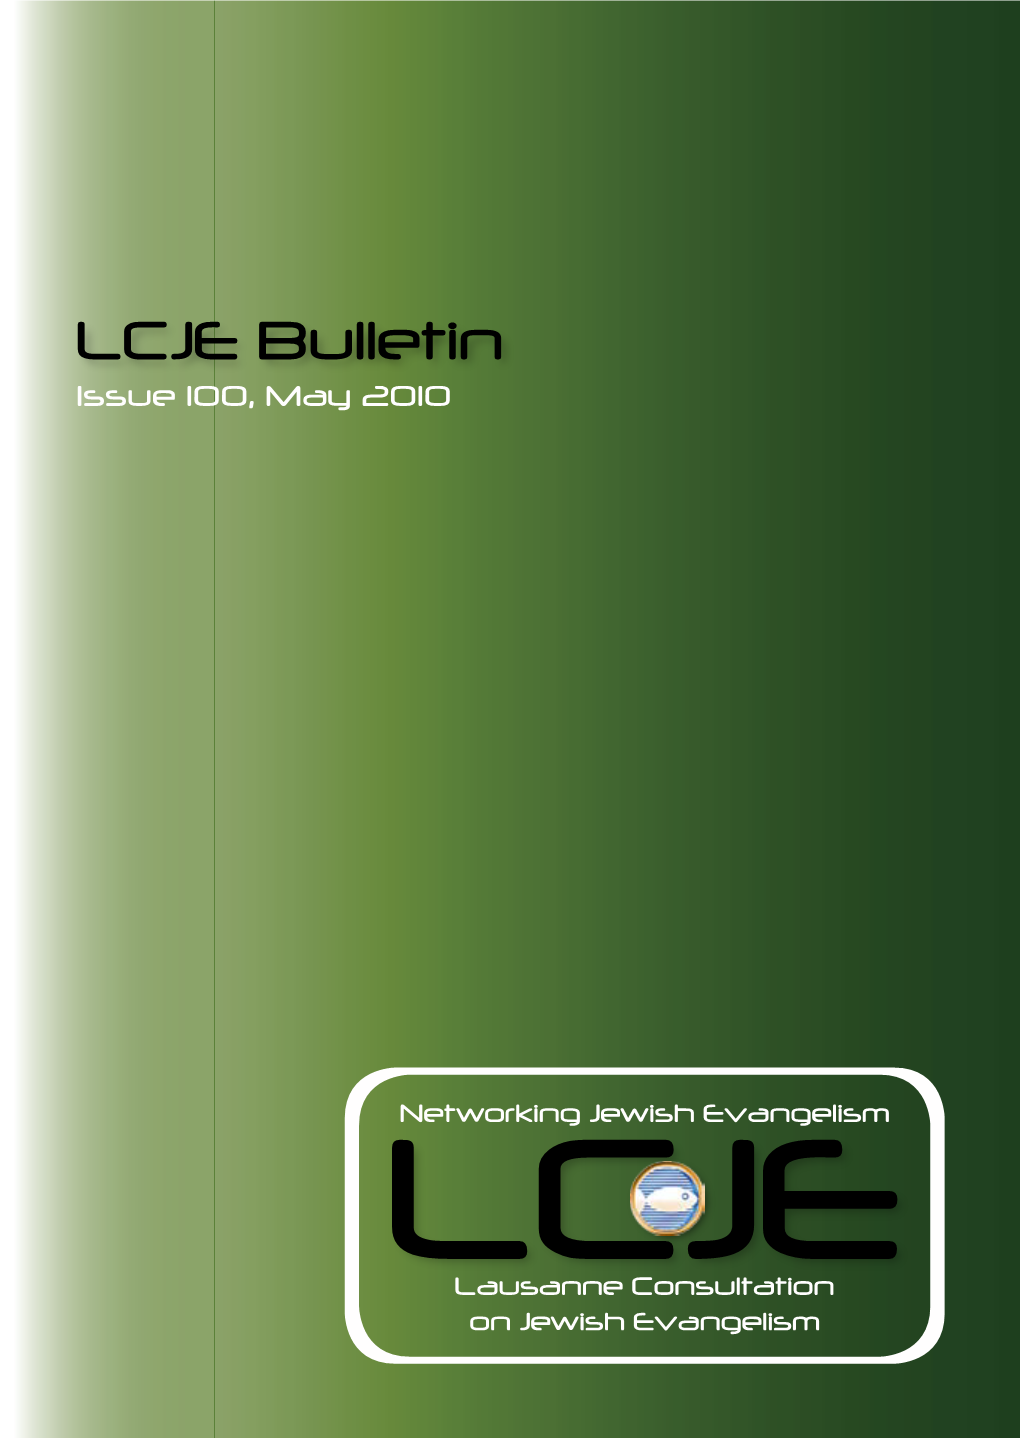 LCJE Bulletin Issue 100, May 2010